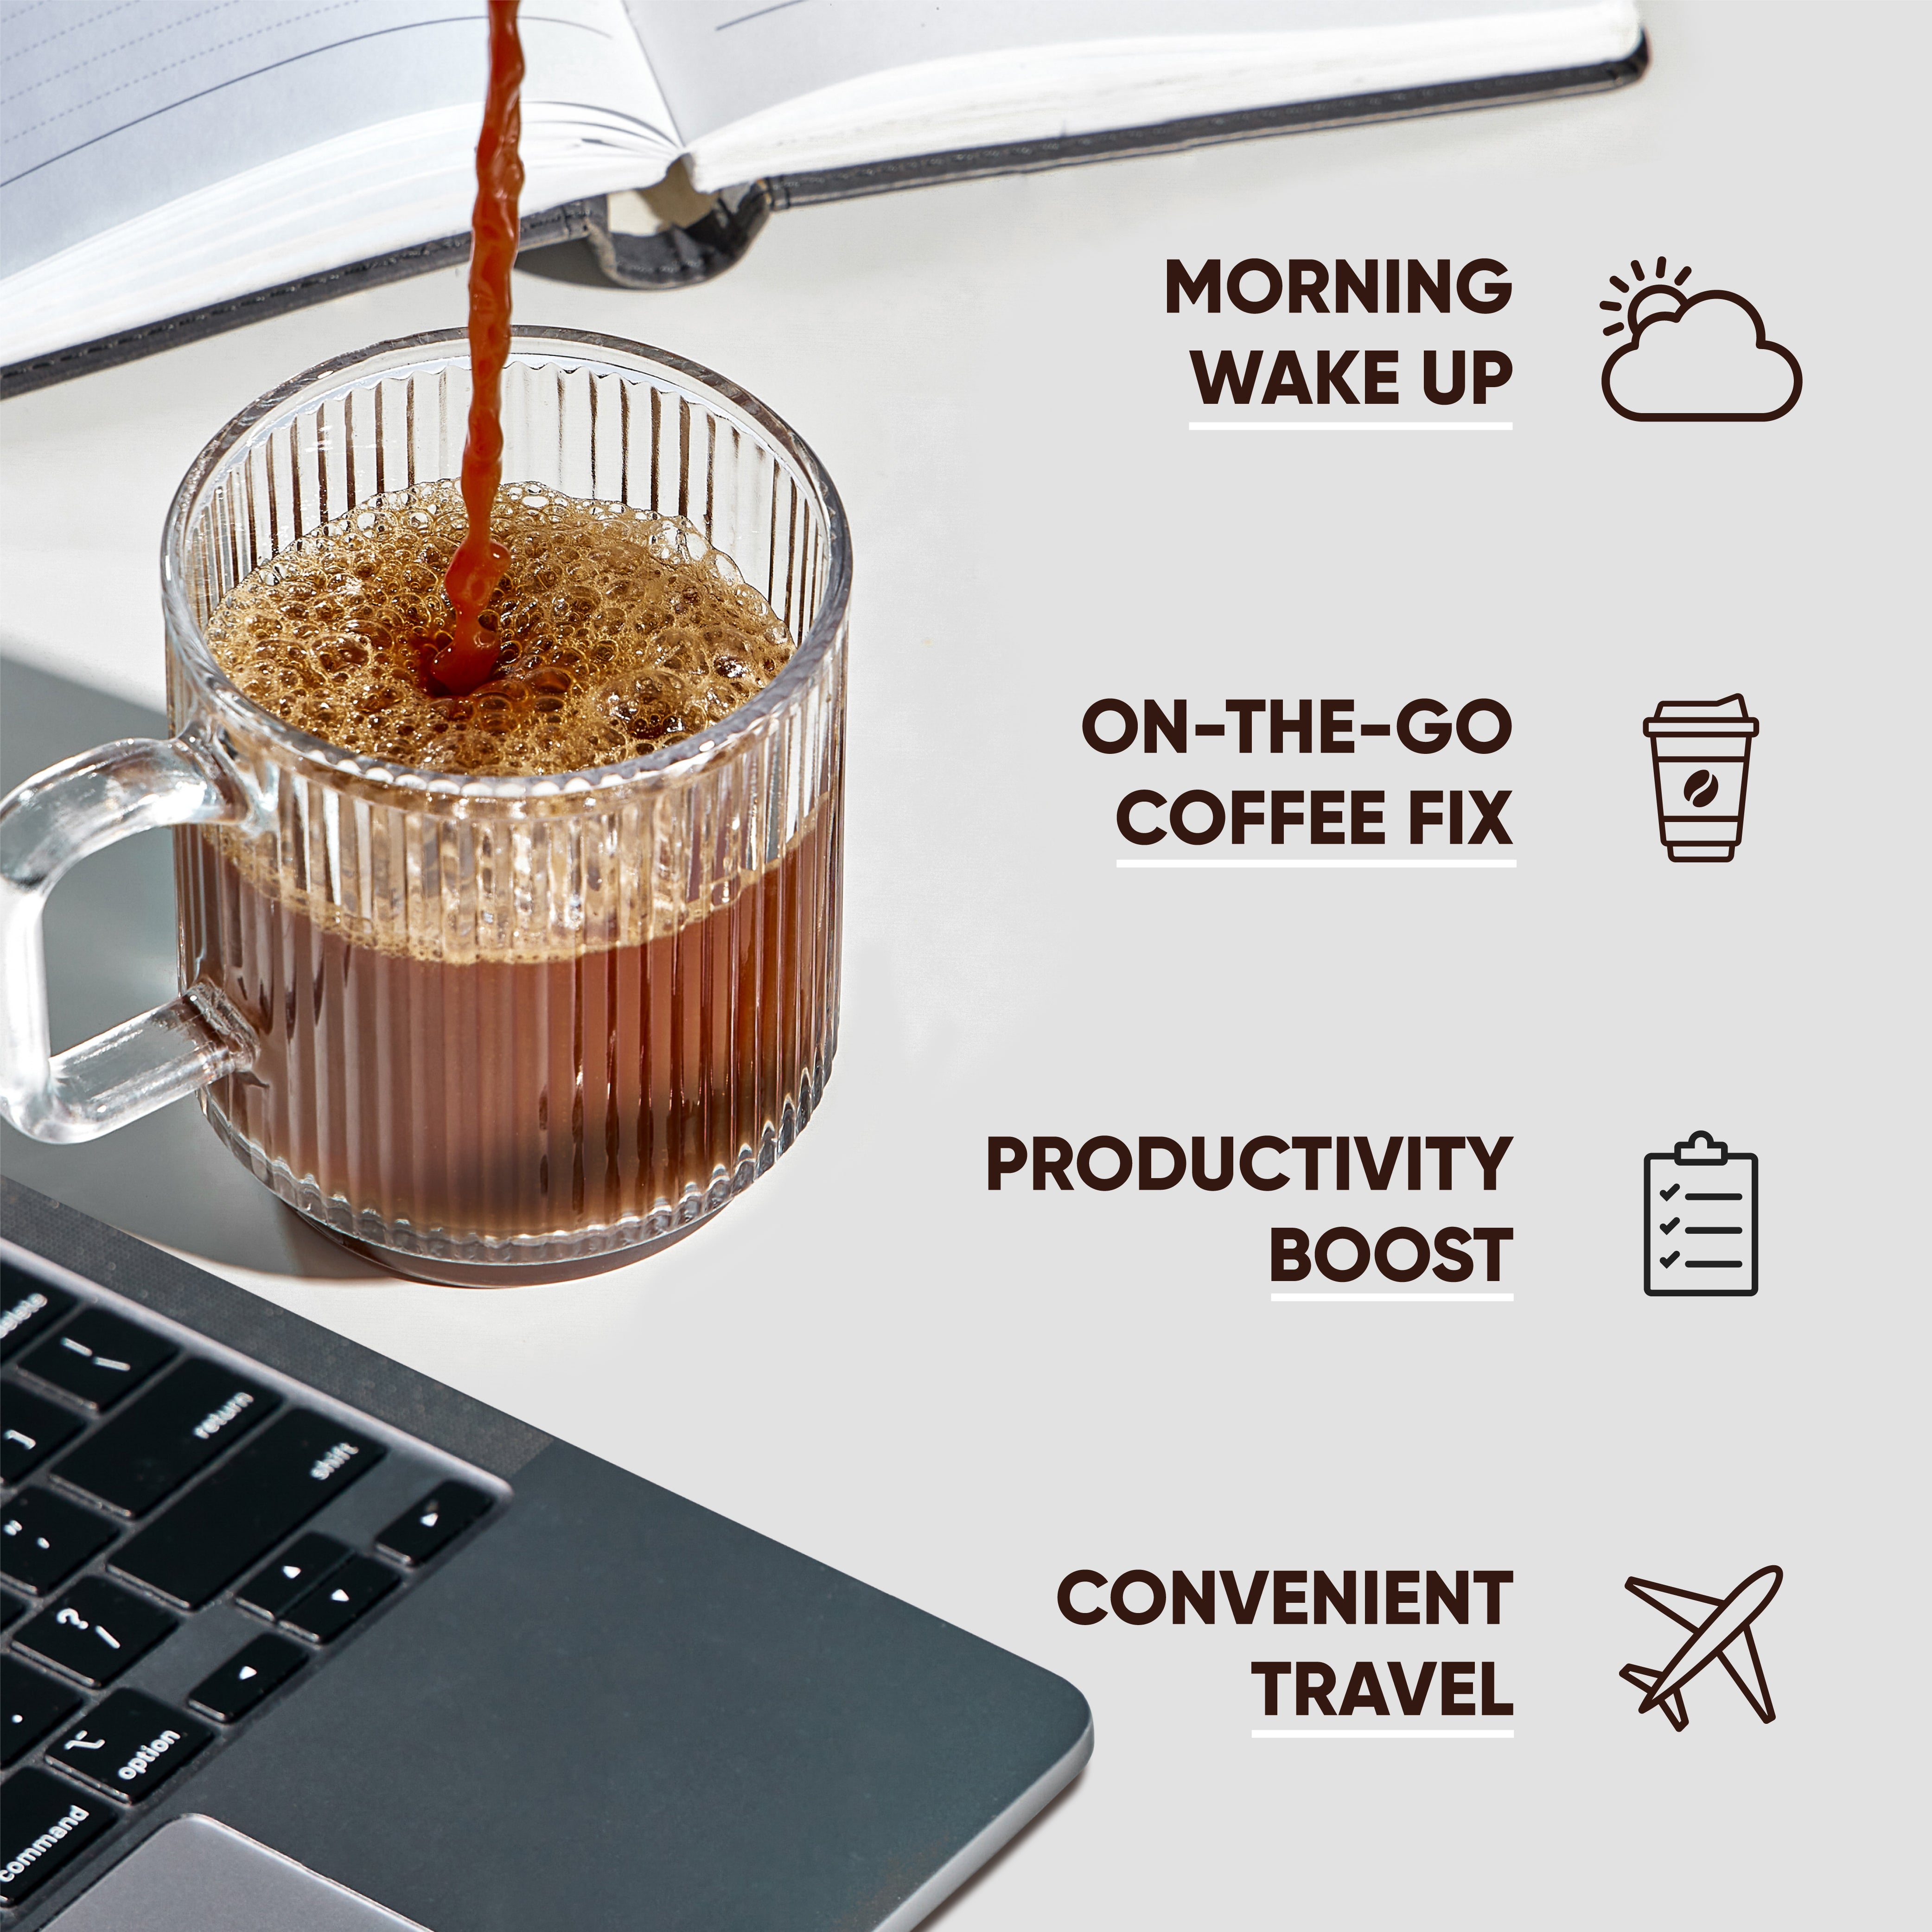 IQJOE Sampler Pack  Instant Coffee is great for: walking up in the morning, on-the-go coffee, productivity boost, convenient travel.